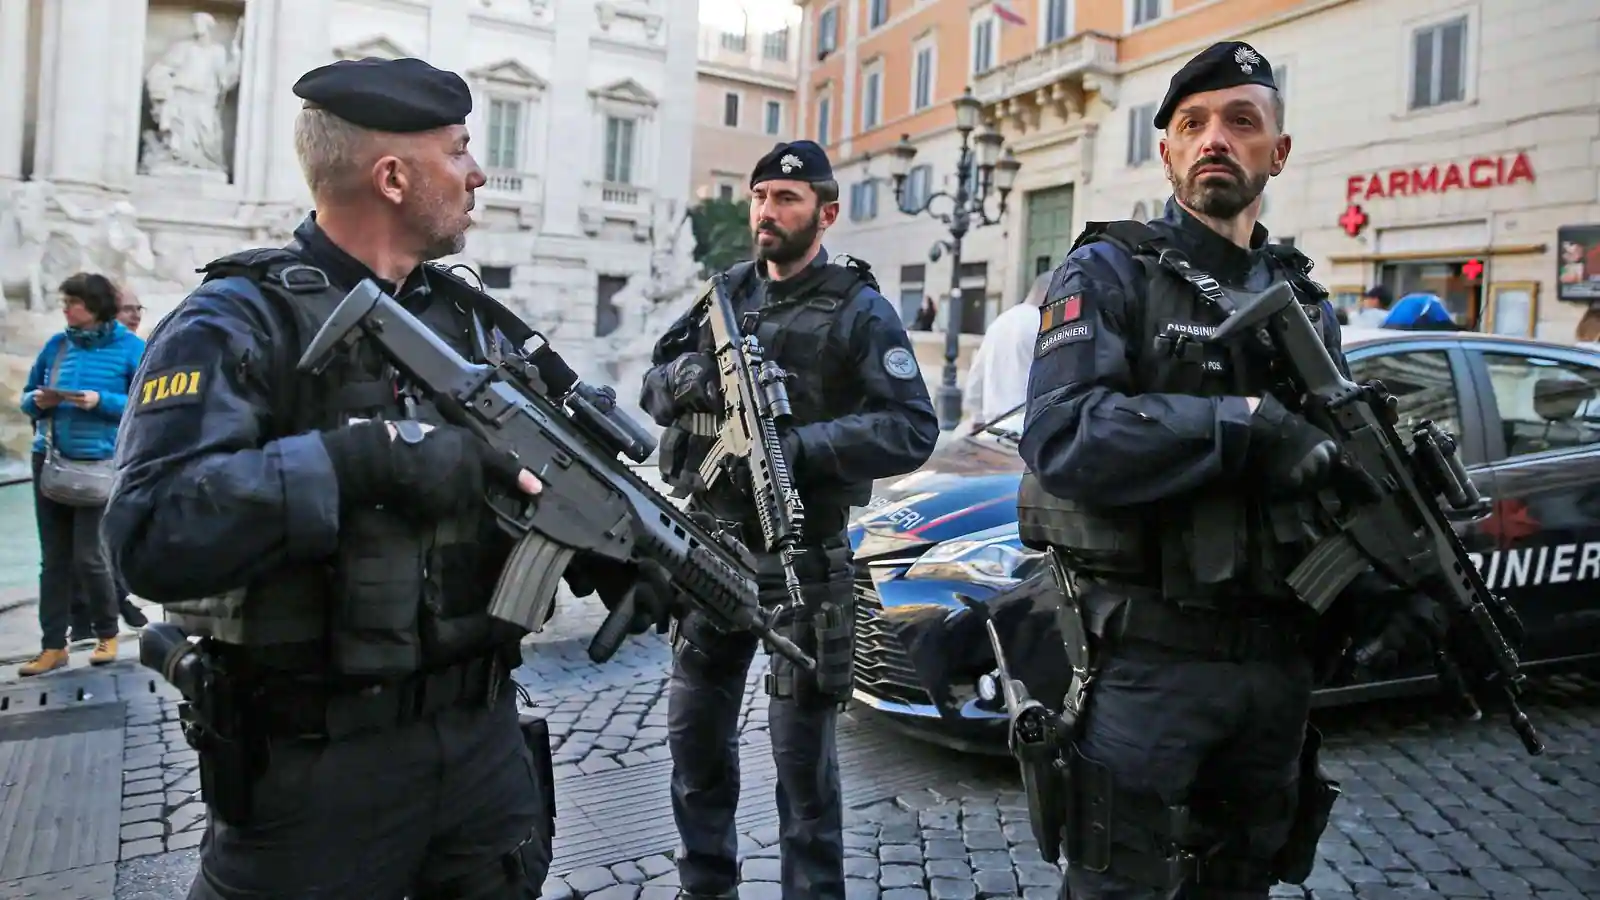 Italian Police Caught Him After Spotting The Image